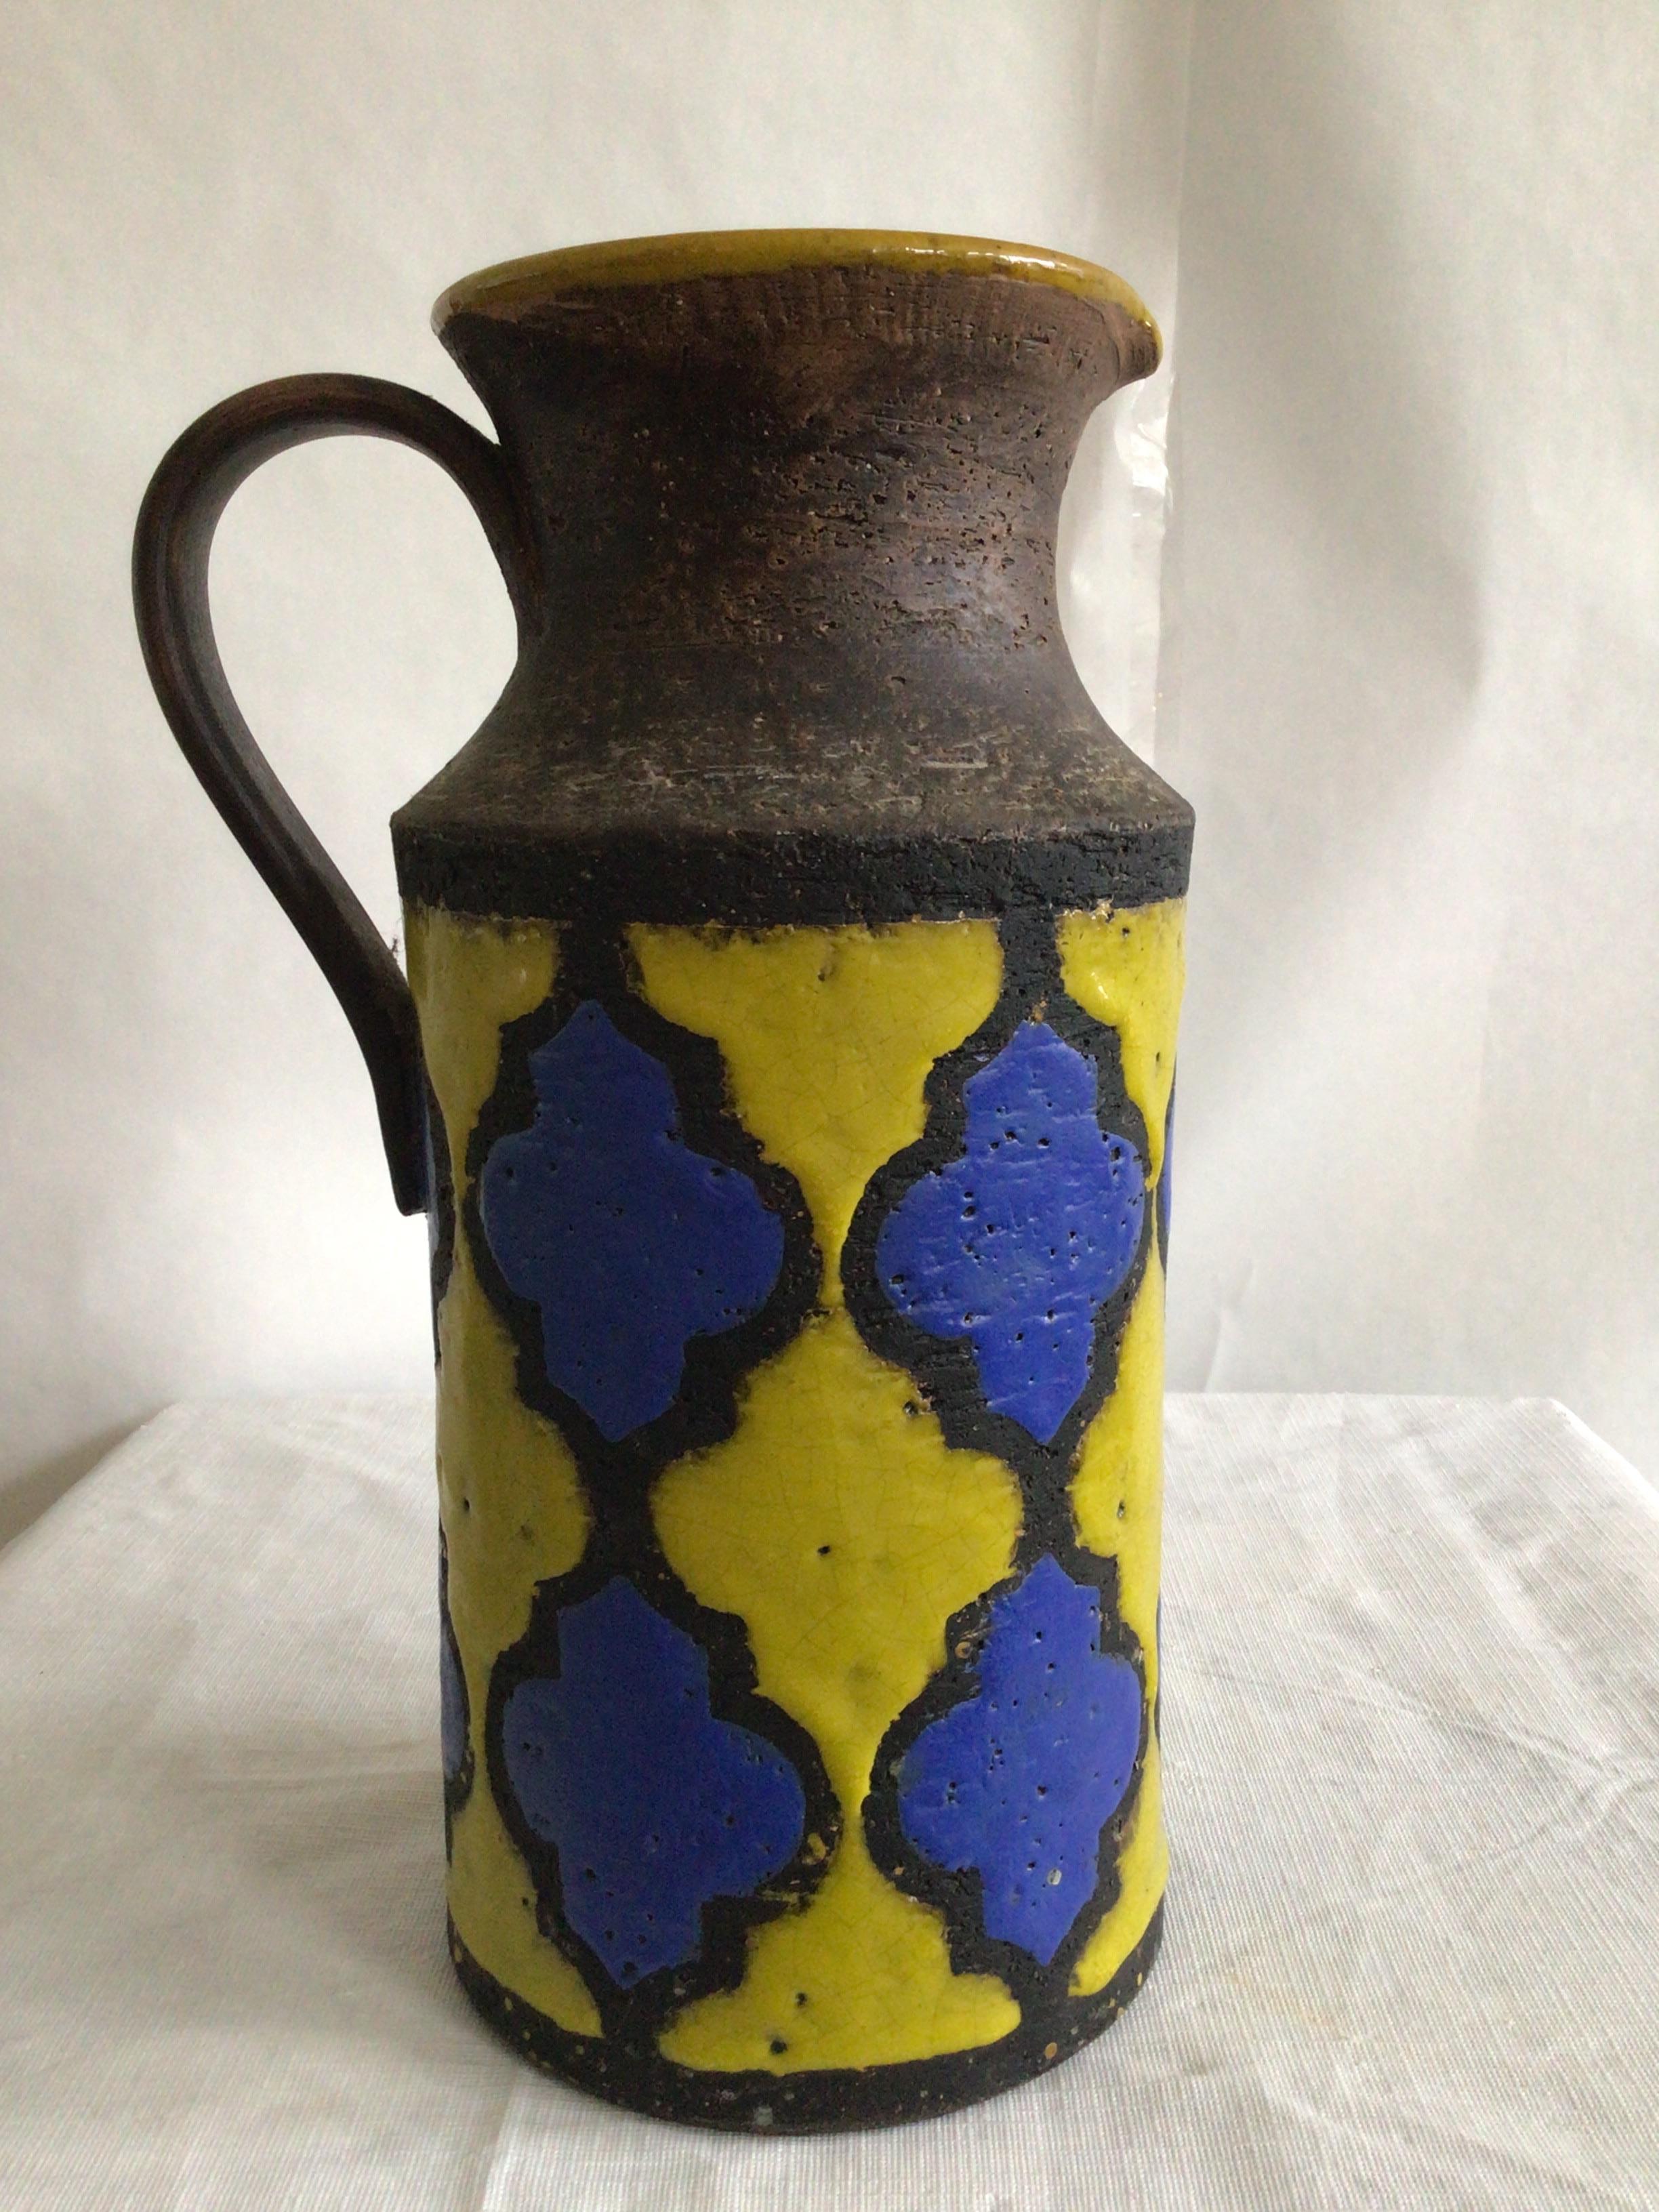 1960s Italian Painted Bicolor Pitcher/Jug
In the style of Aldo Londi for Bitossi vase in bright blue and striking yellow colorway. Resembles two color tiles 
Decoration gives a stained glass look that contrasts with the unglazed, rough